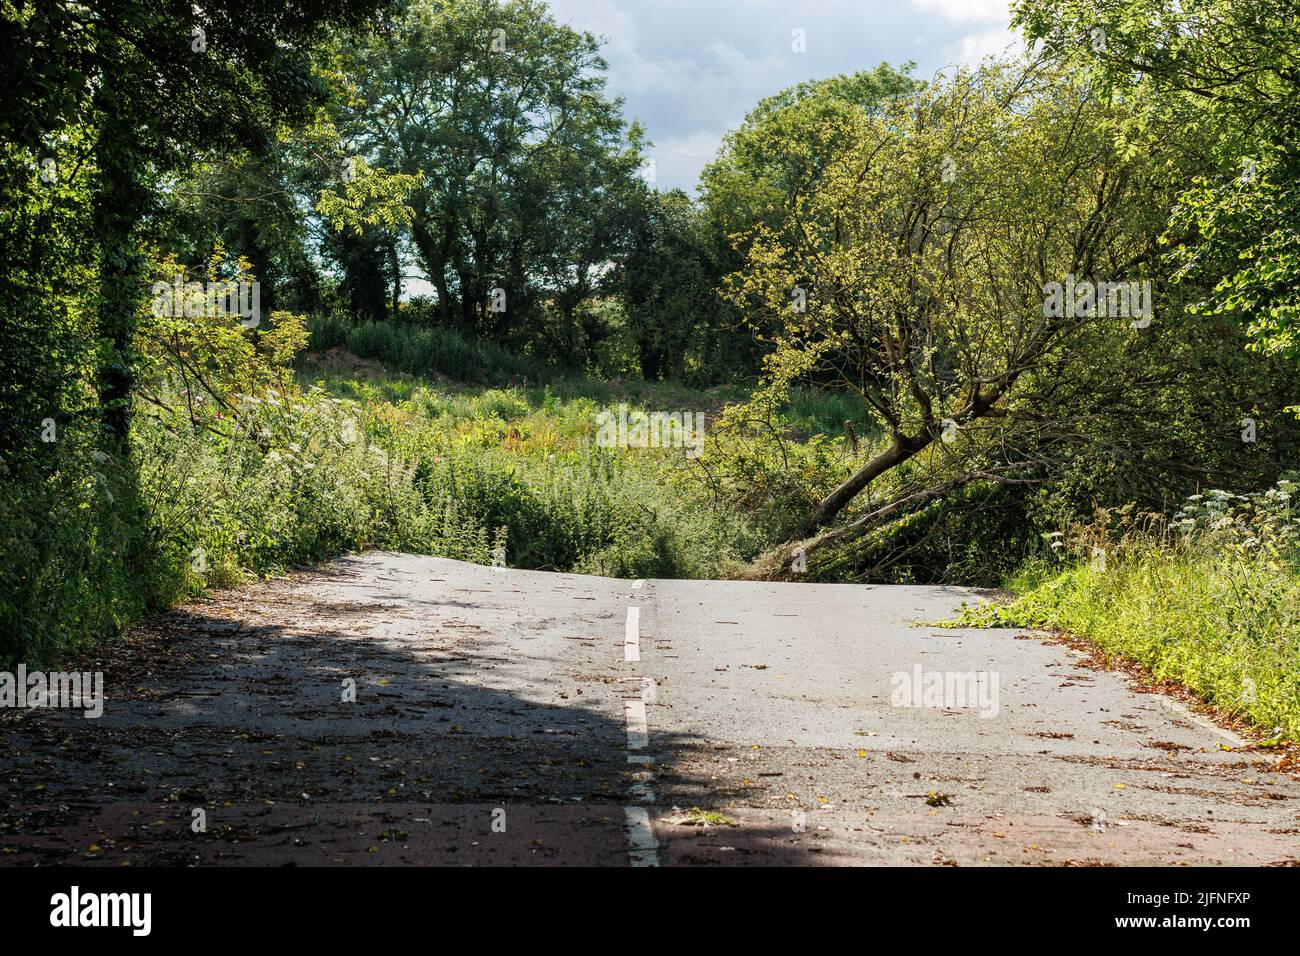 The B4069 near Lyneham in Wiltshire has buckled in places, leaving huge cracks in the road, due to subsidence. Stock Photo